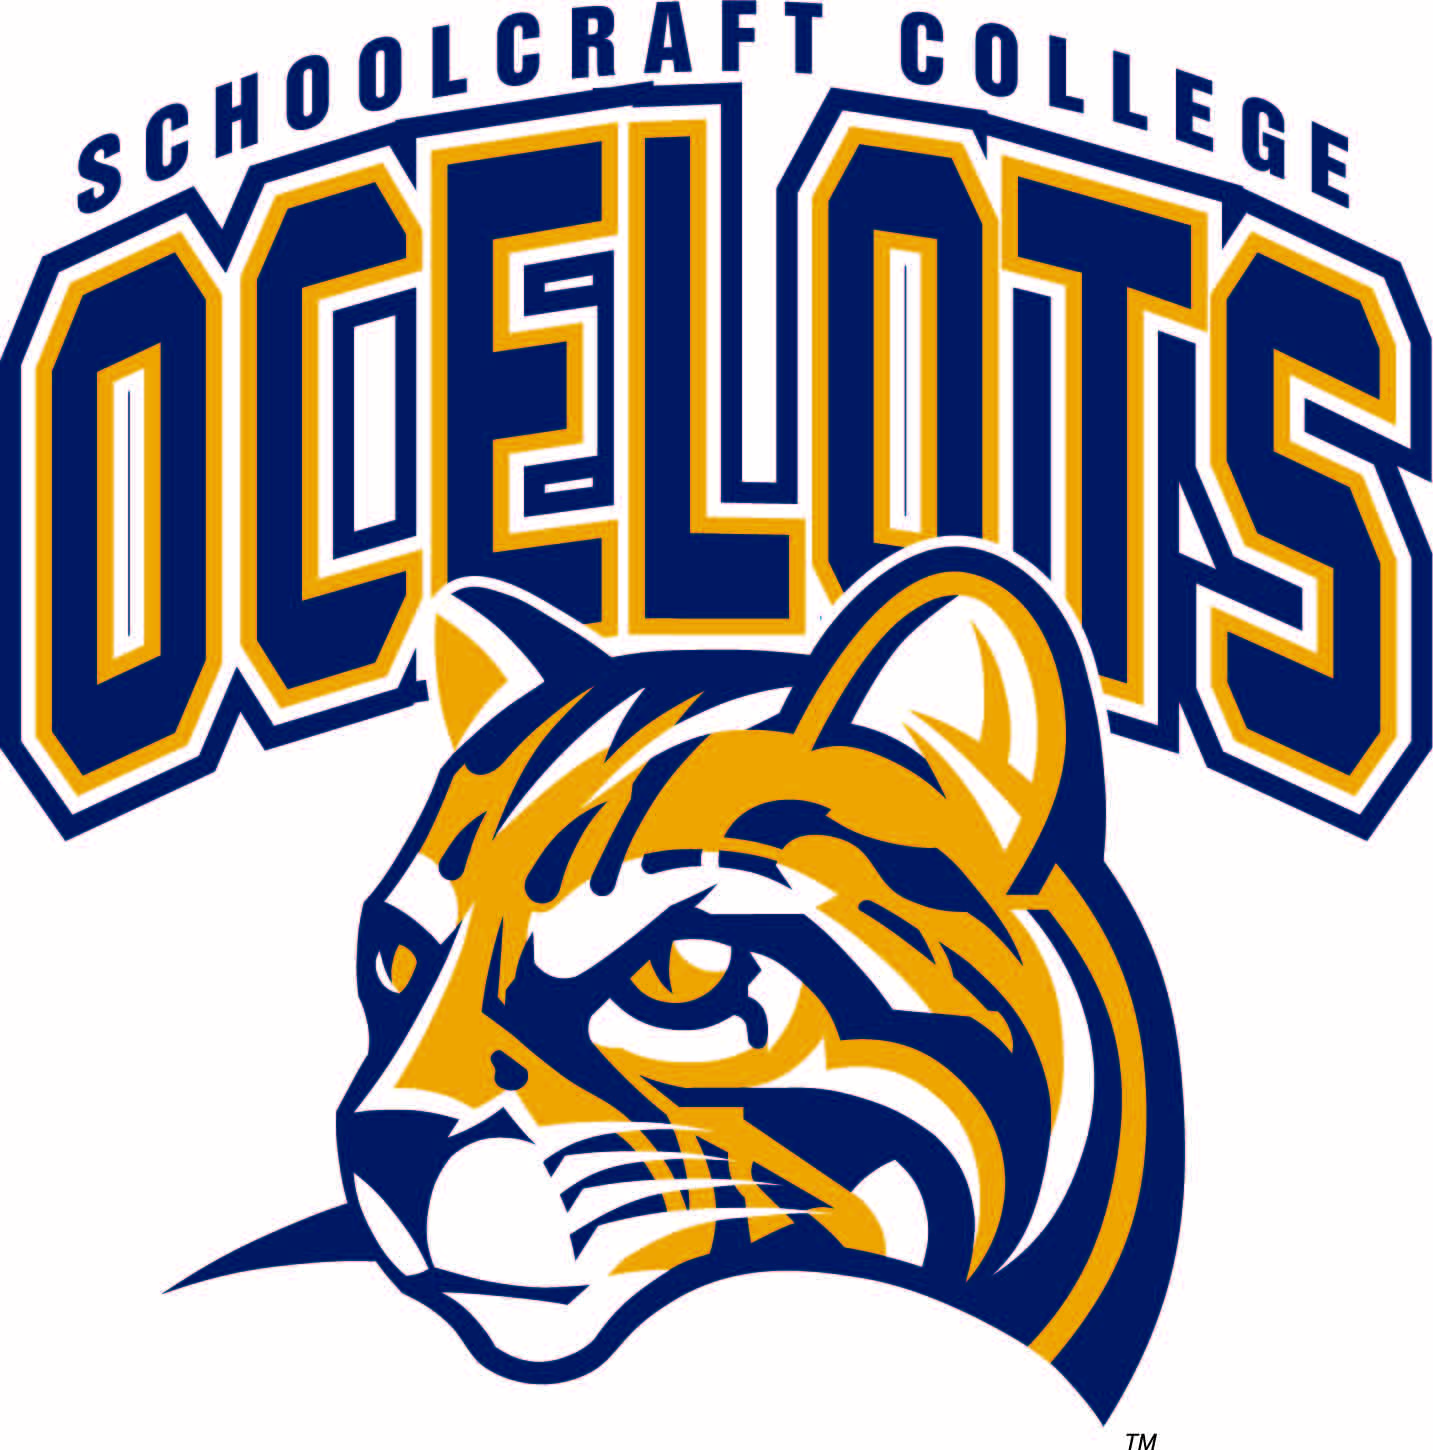 Illustration artwork of an ocelot cat in blue and gold color with block collegiate lettering behind it that reads Schoolcraft College Ocelots